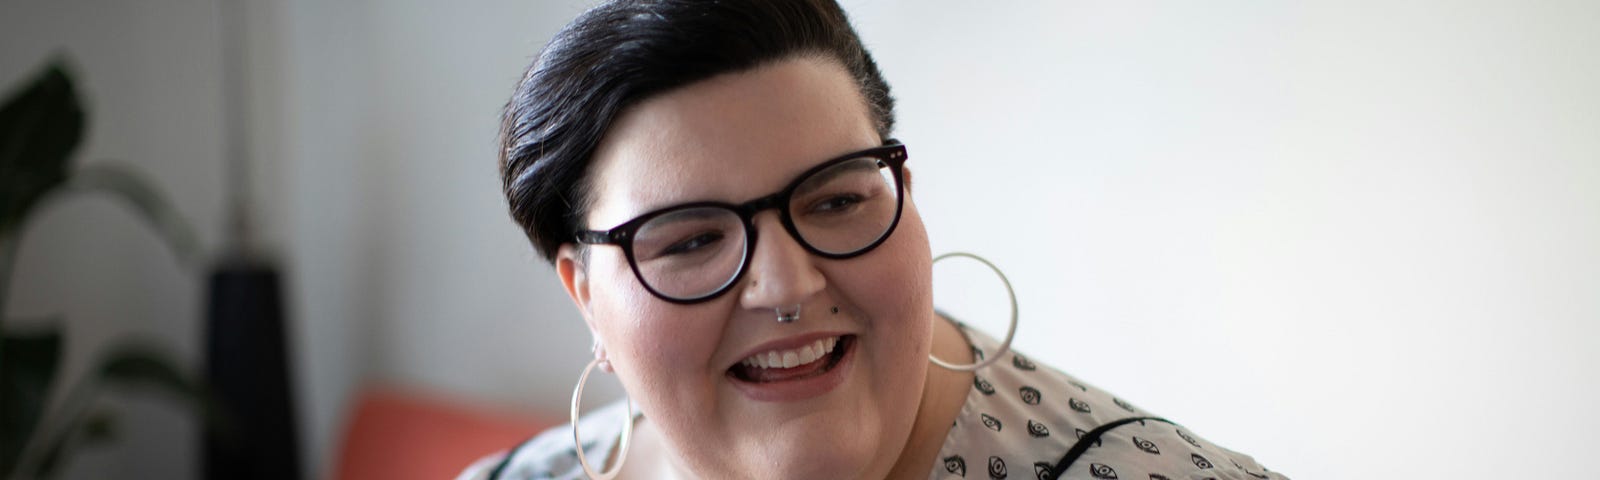 A smiling fat woman with ear and nose piercings wearing glasses.